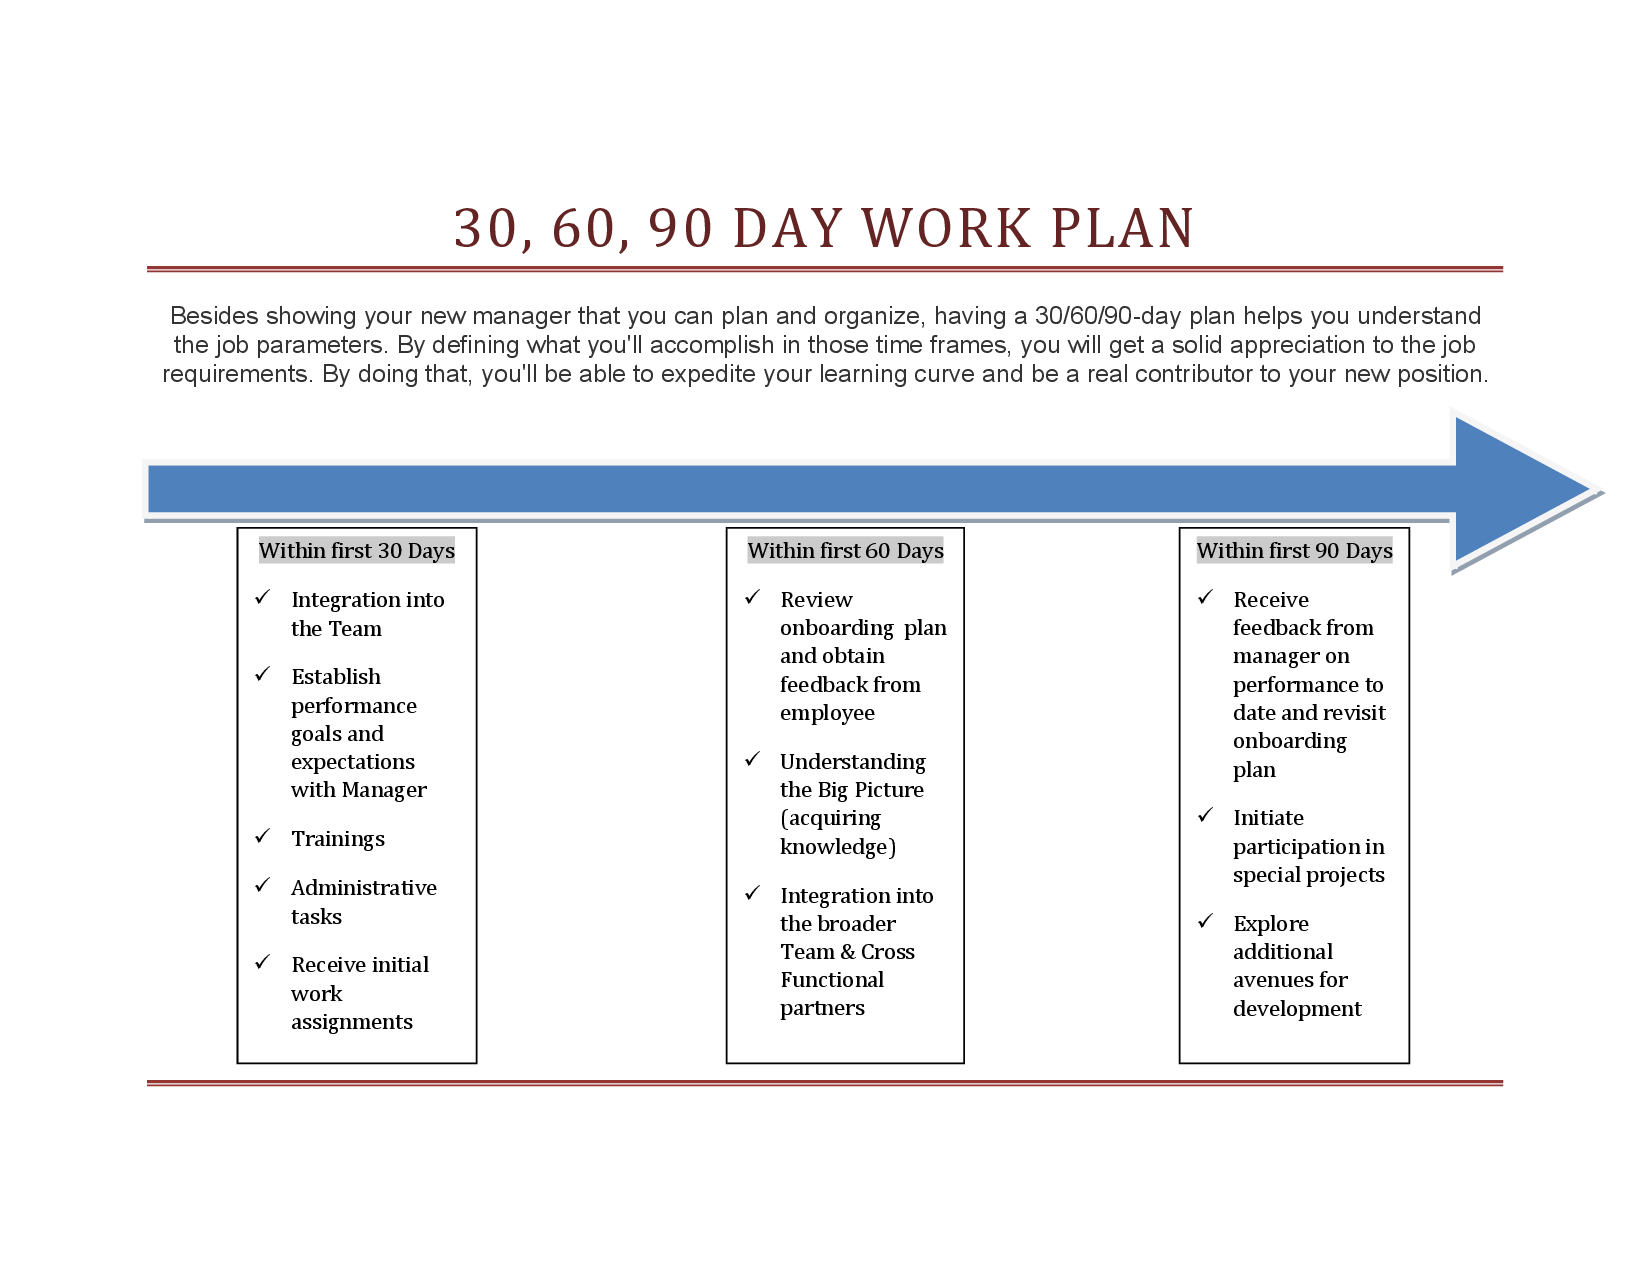 30 60 90 Day Work Plan Template | 90 Day Plan, Marketing Intended For 30 60 90 Day Plan Template Word